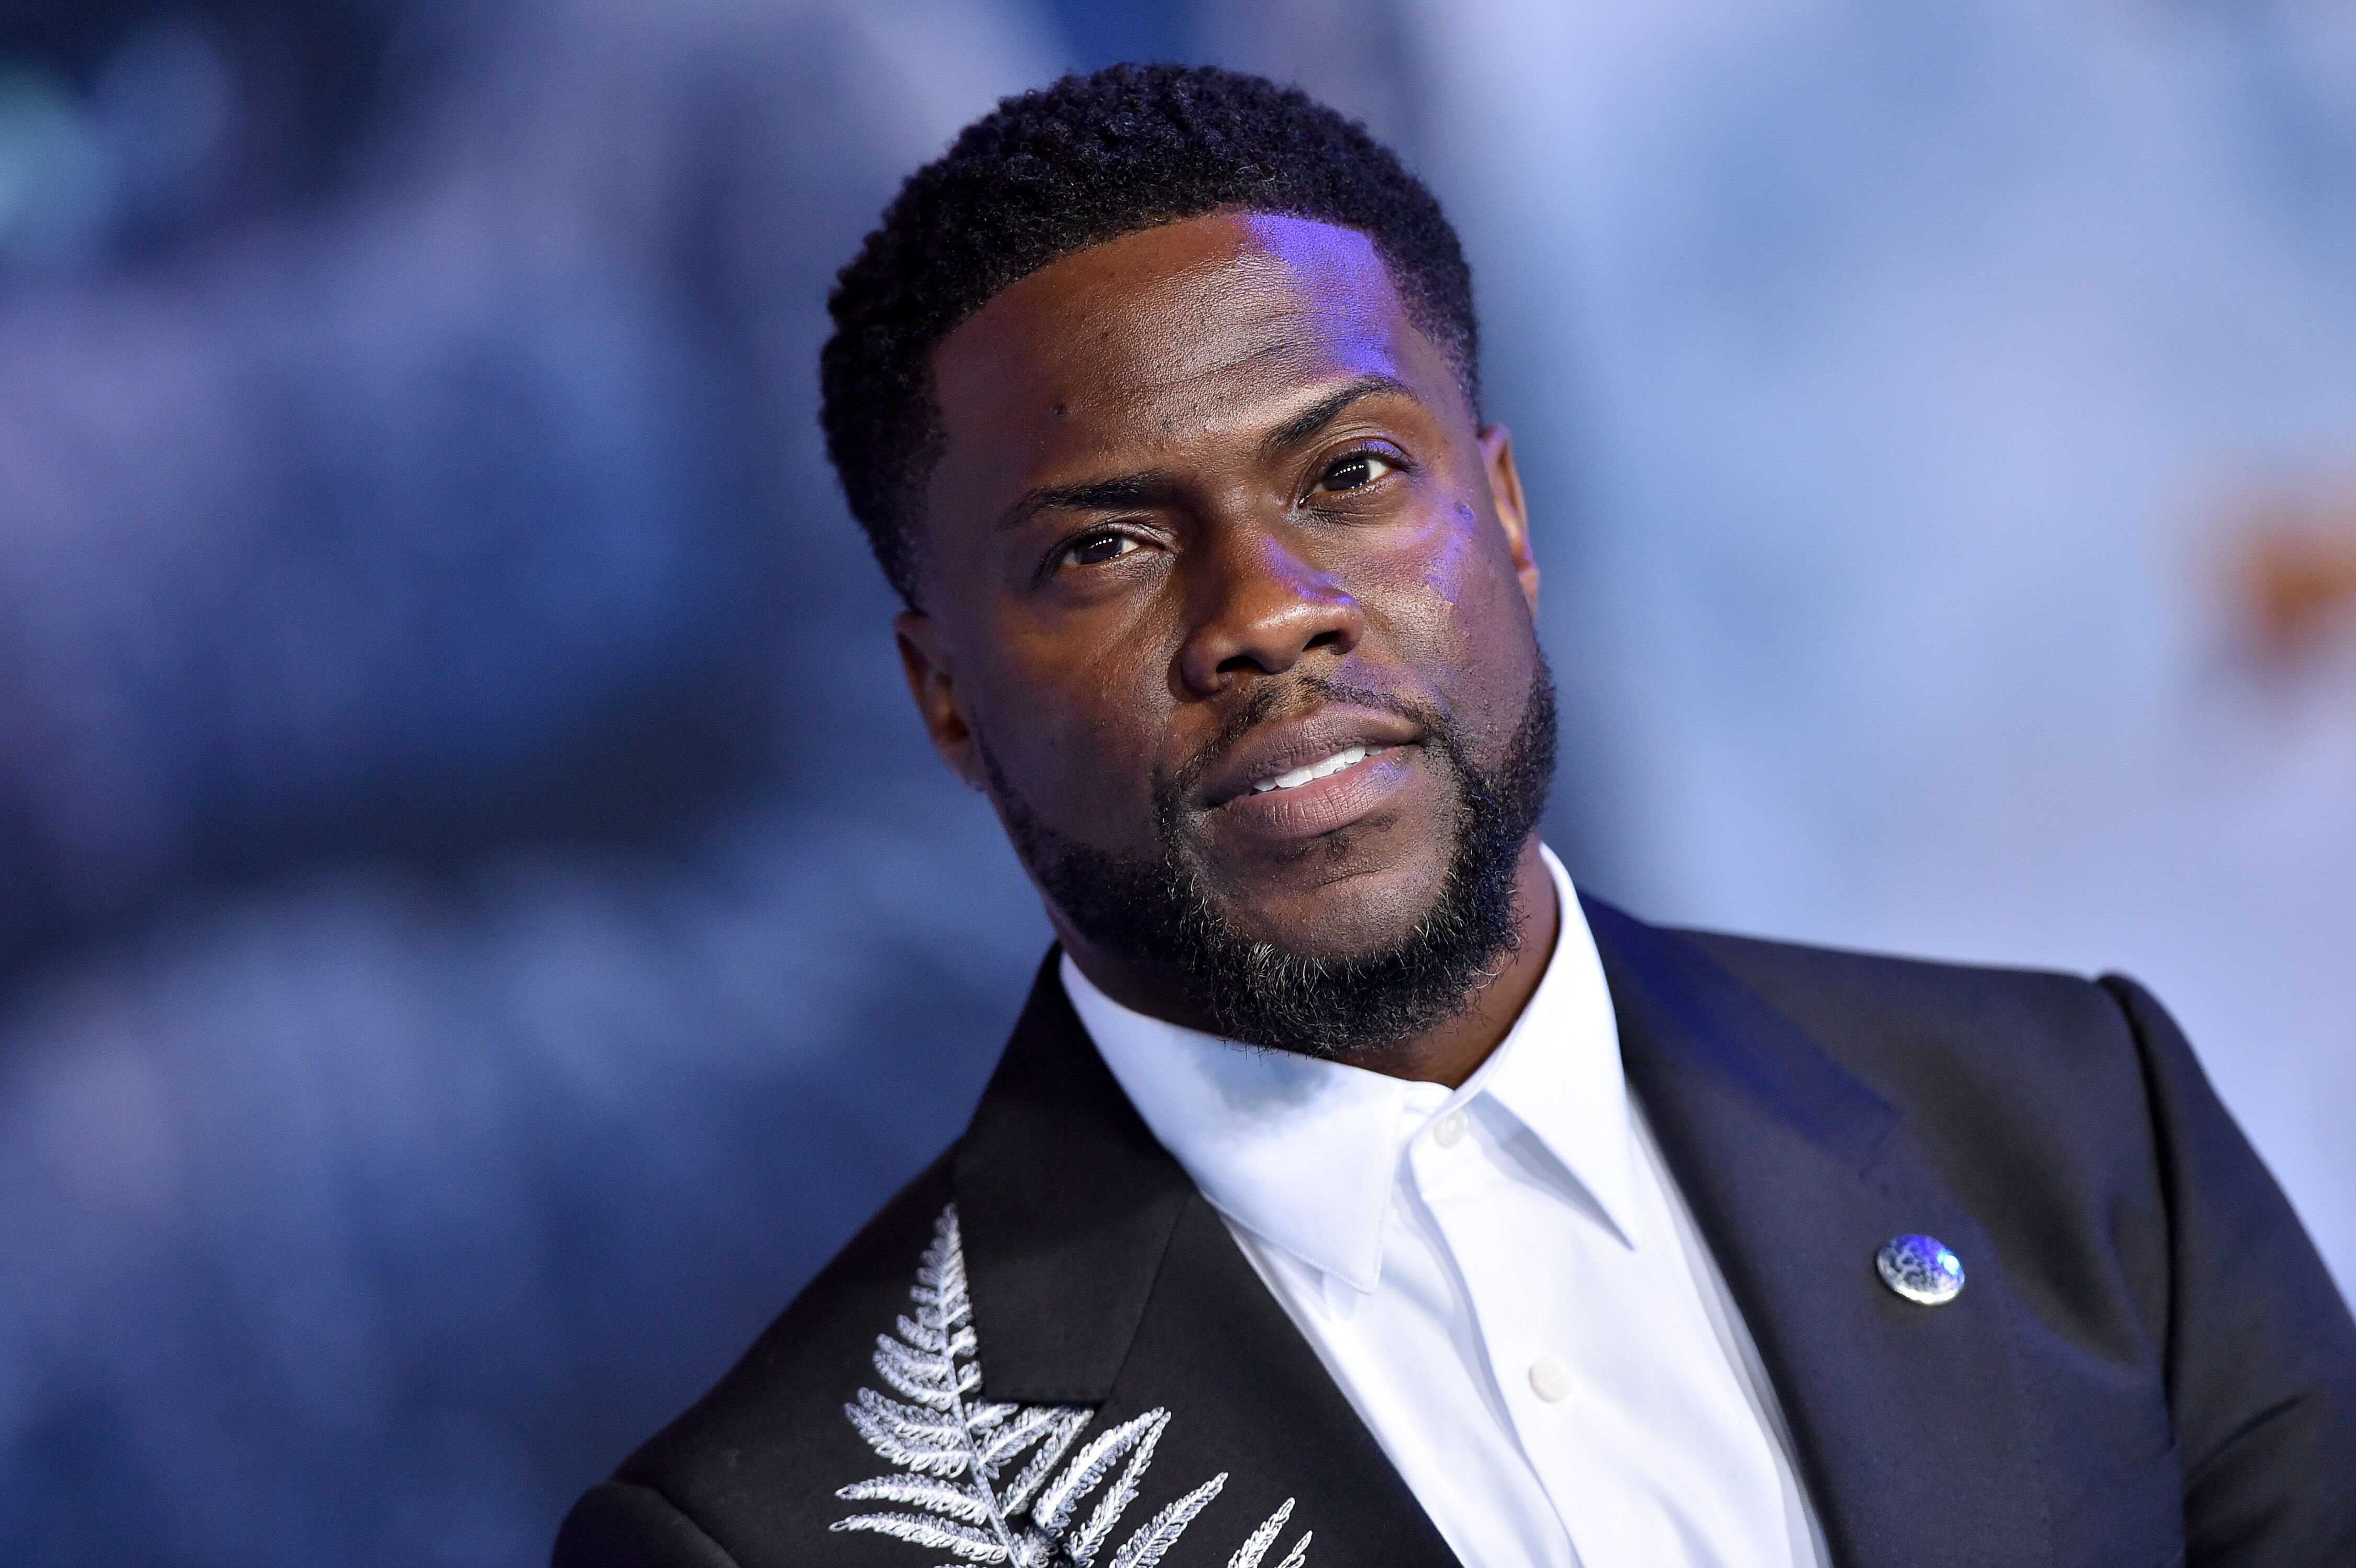 Kevin Hart at the premiere of Sony Pictures' "Jumanji: The Next Level" on December 09, 2019. | Photo: Getty Images